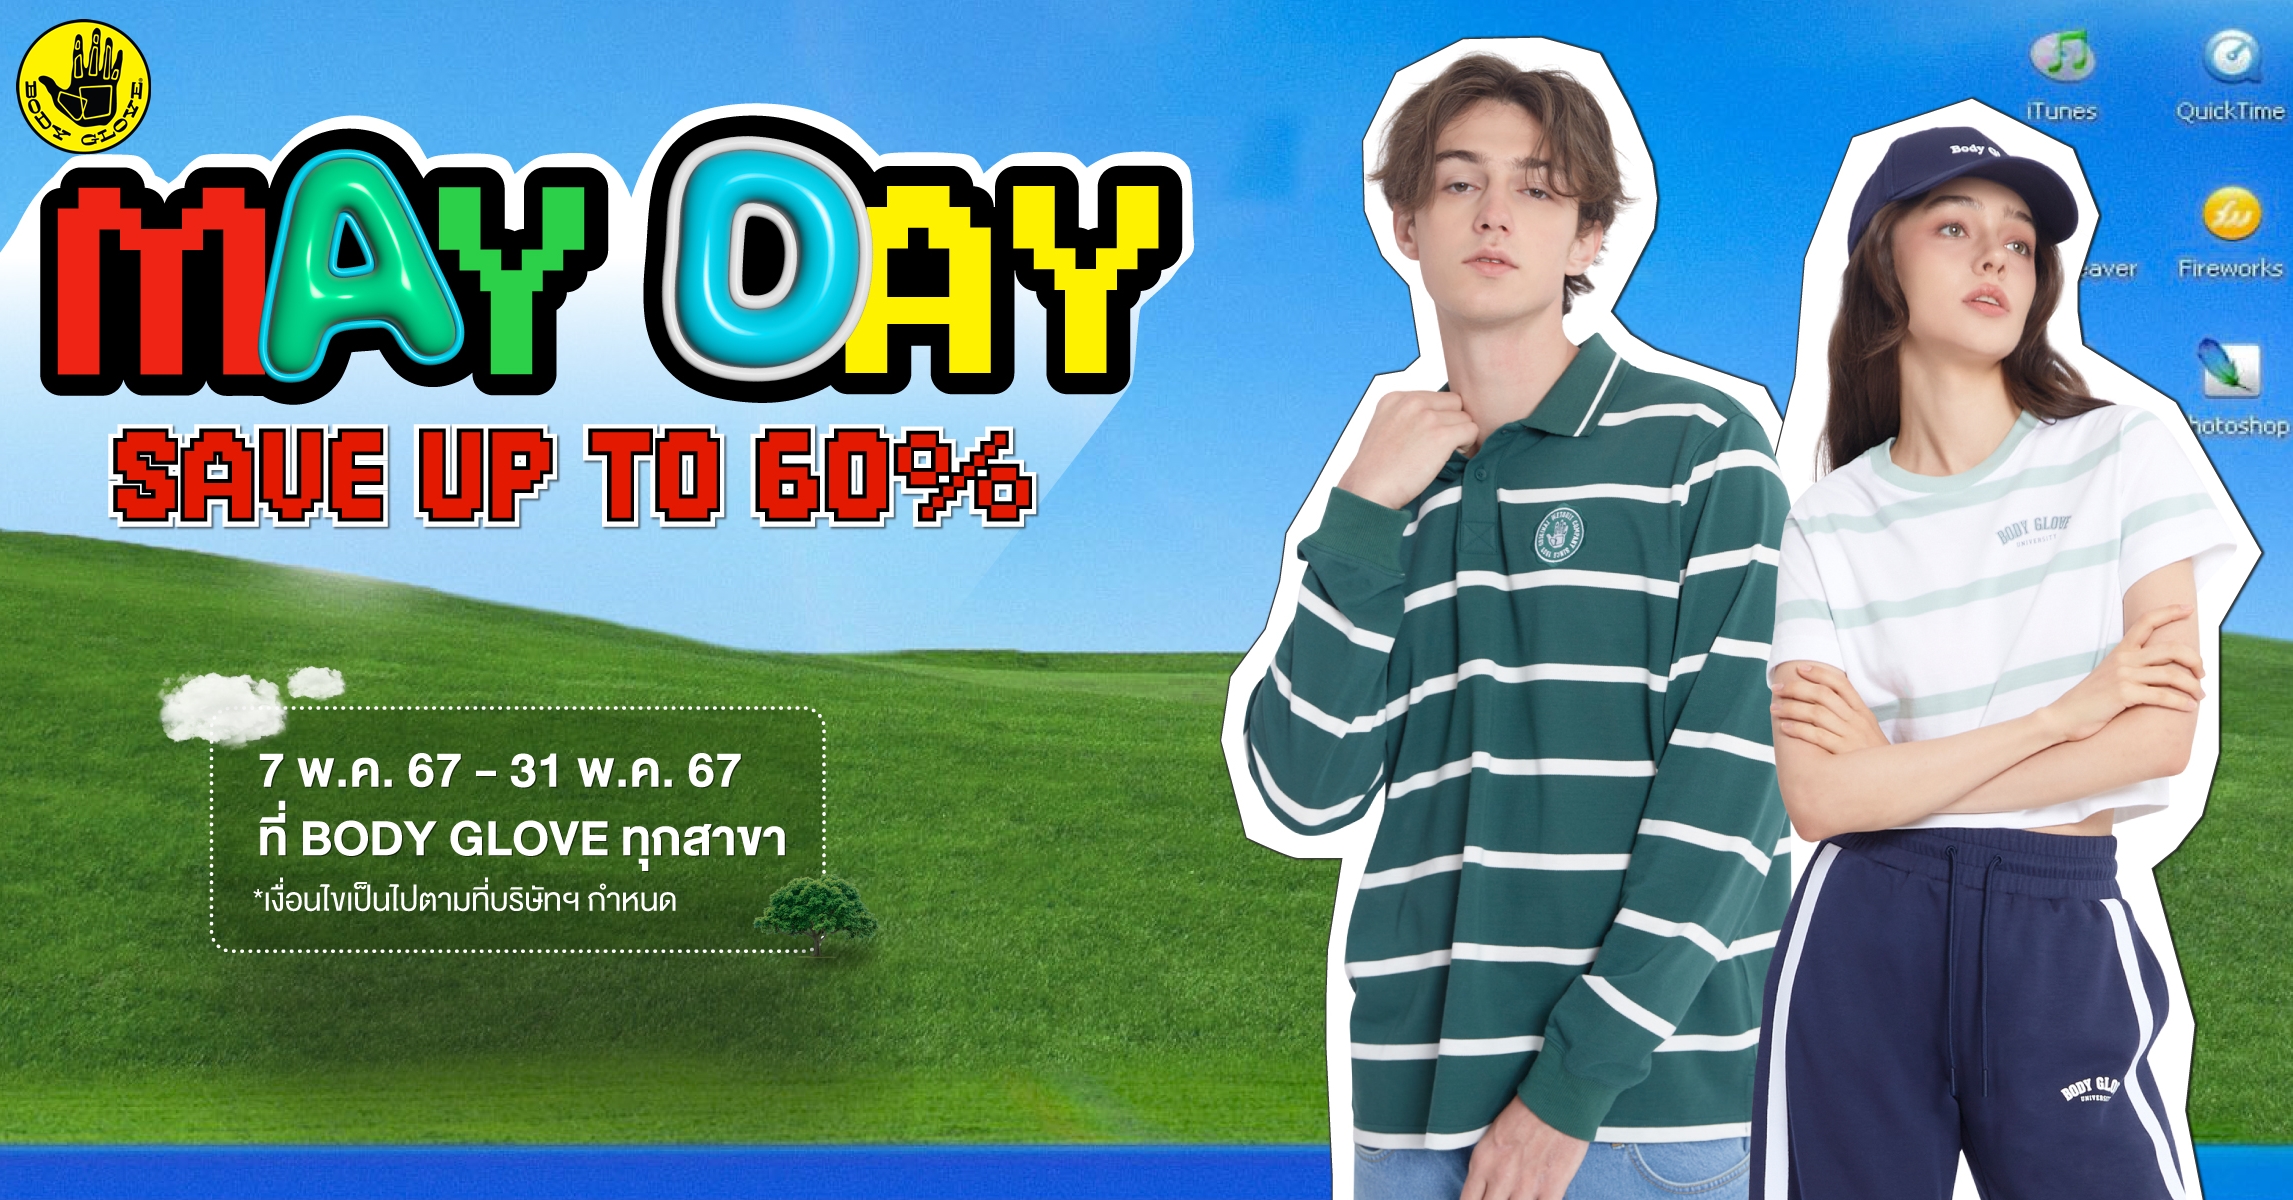 MAY DAY | Save up to 60%